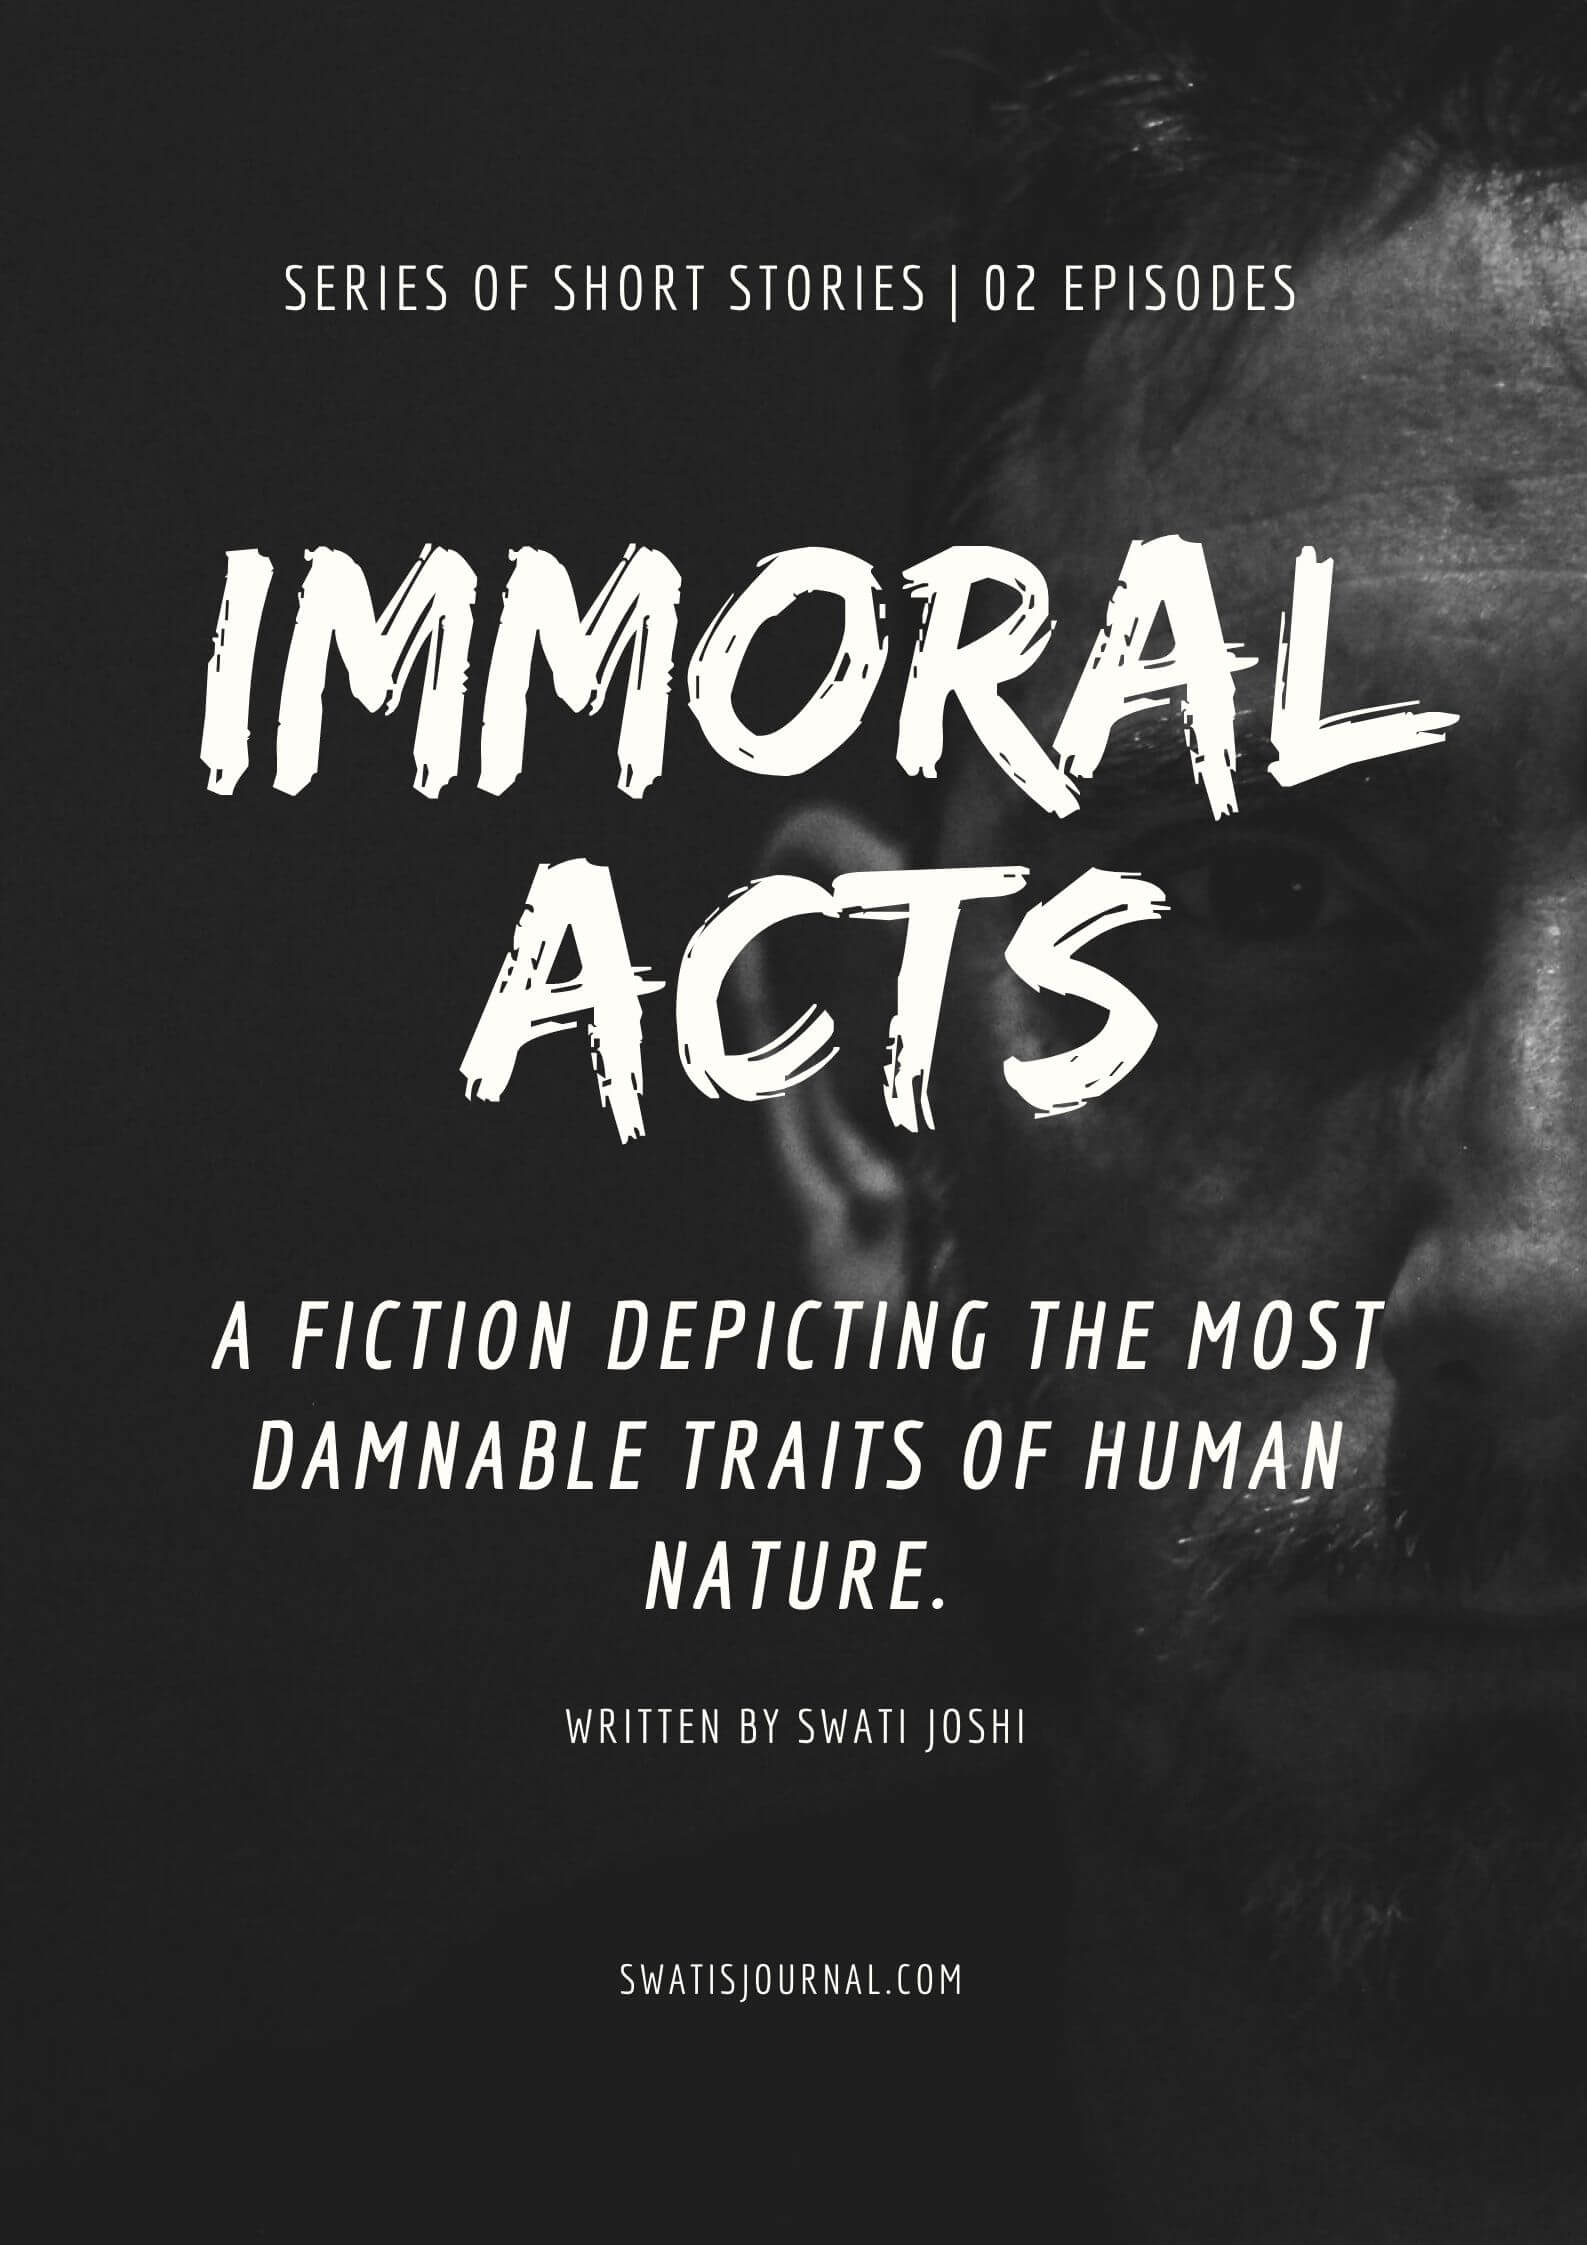 immoral acts poster - swati's Journal short story